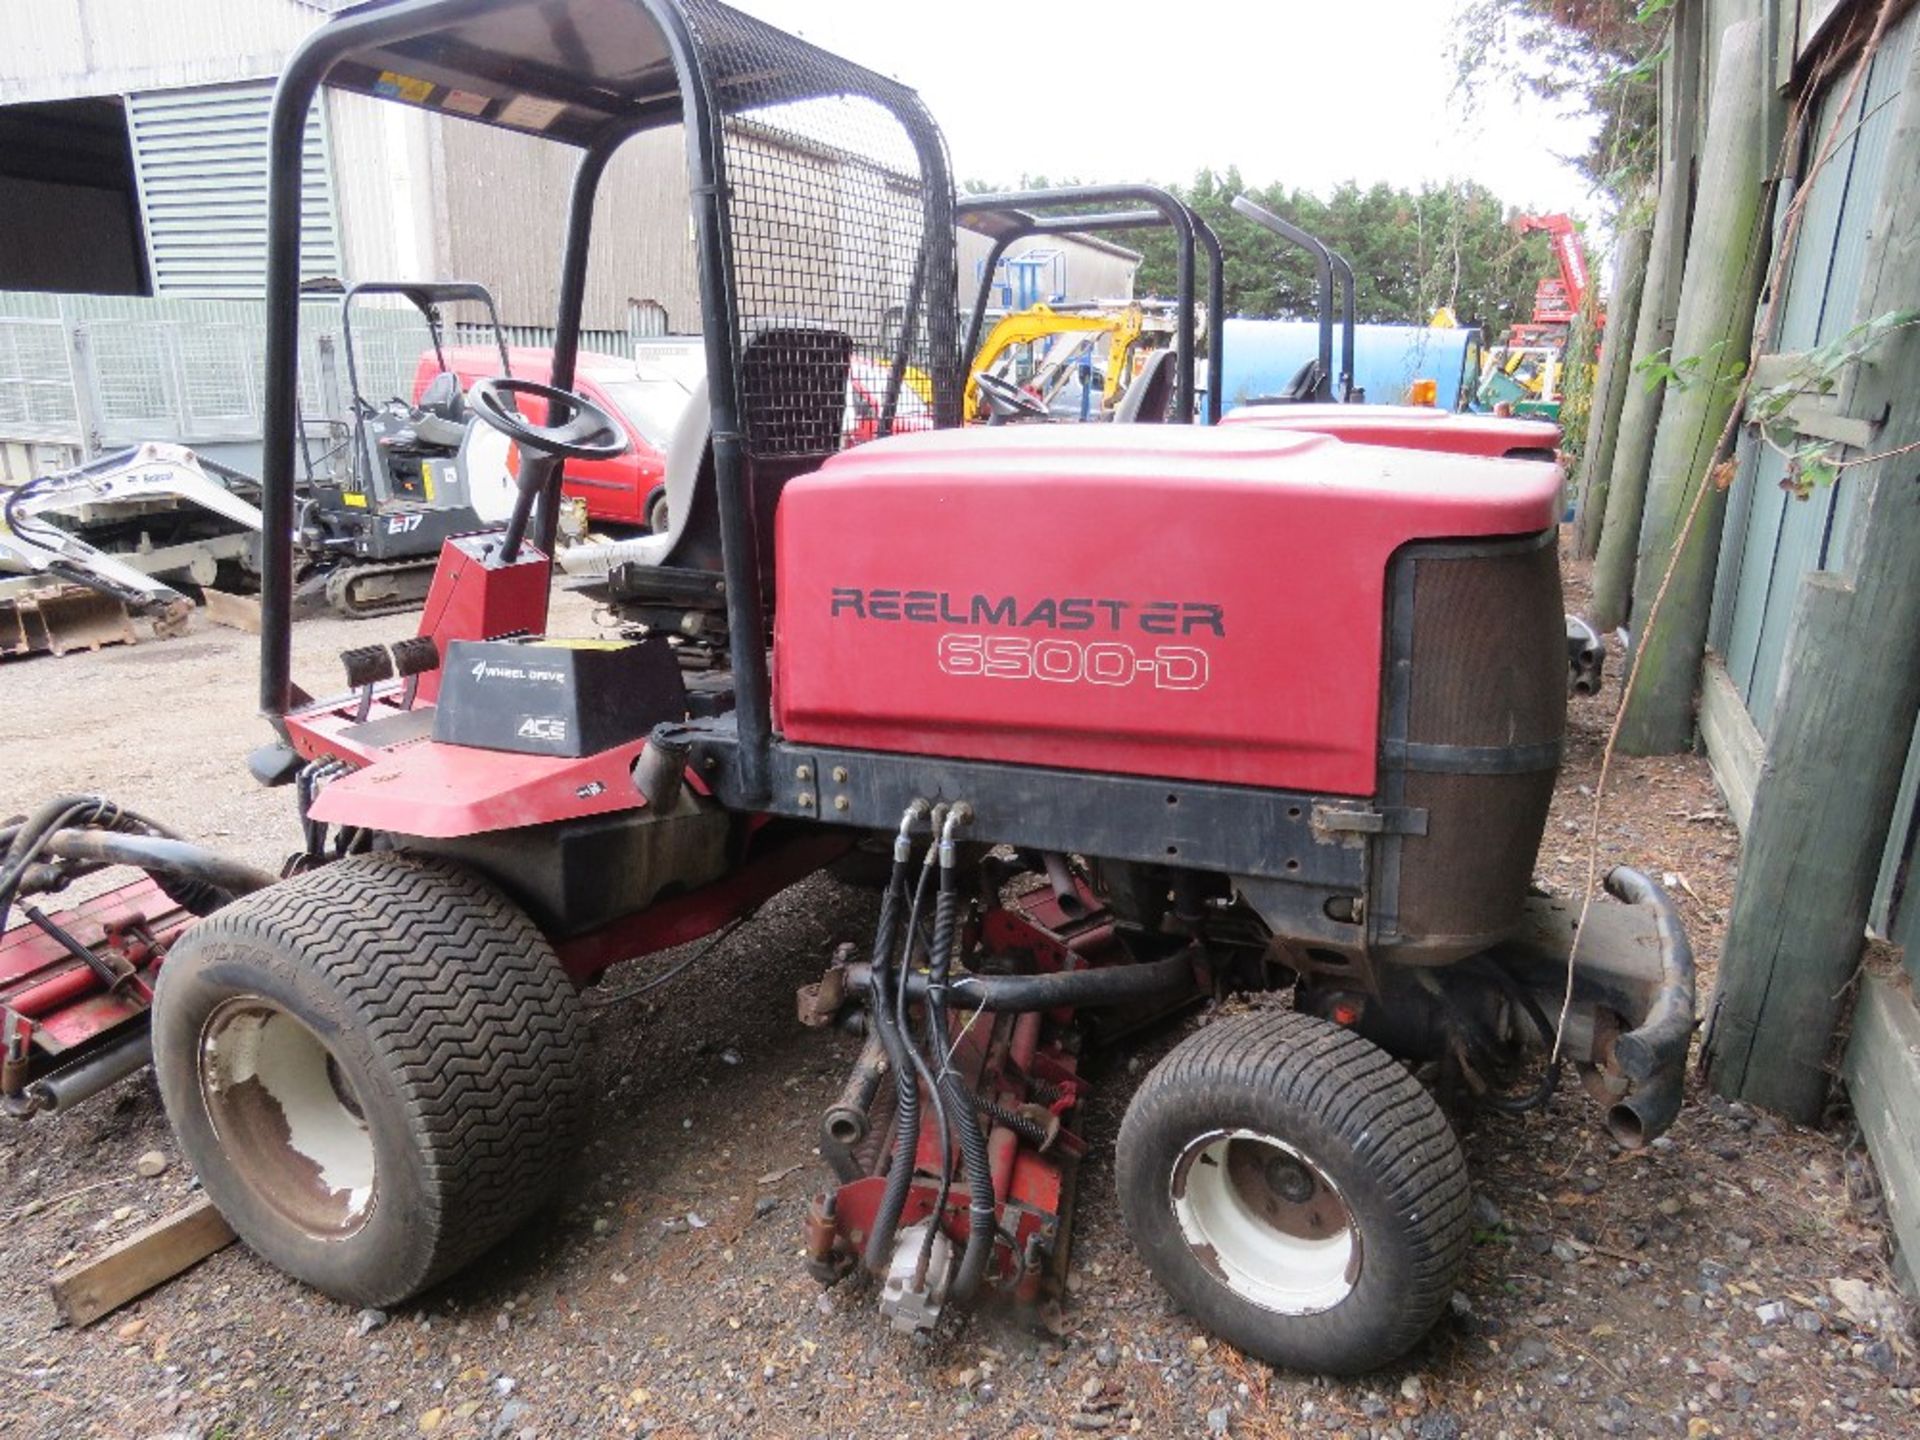 TORO REELMASTER 6500D 5 GANG 4WD MOWER, EX GOLF COURSE. WHEN TESTED WAS SEEN TO RUN, DRIVE AND BLADE - Image 3 of 5